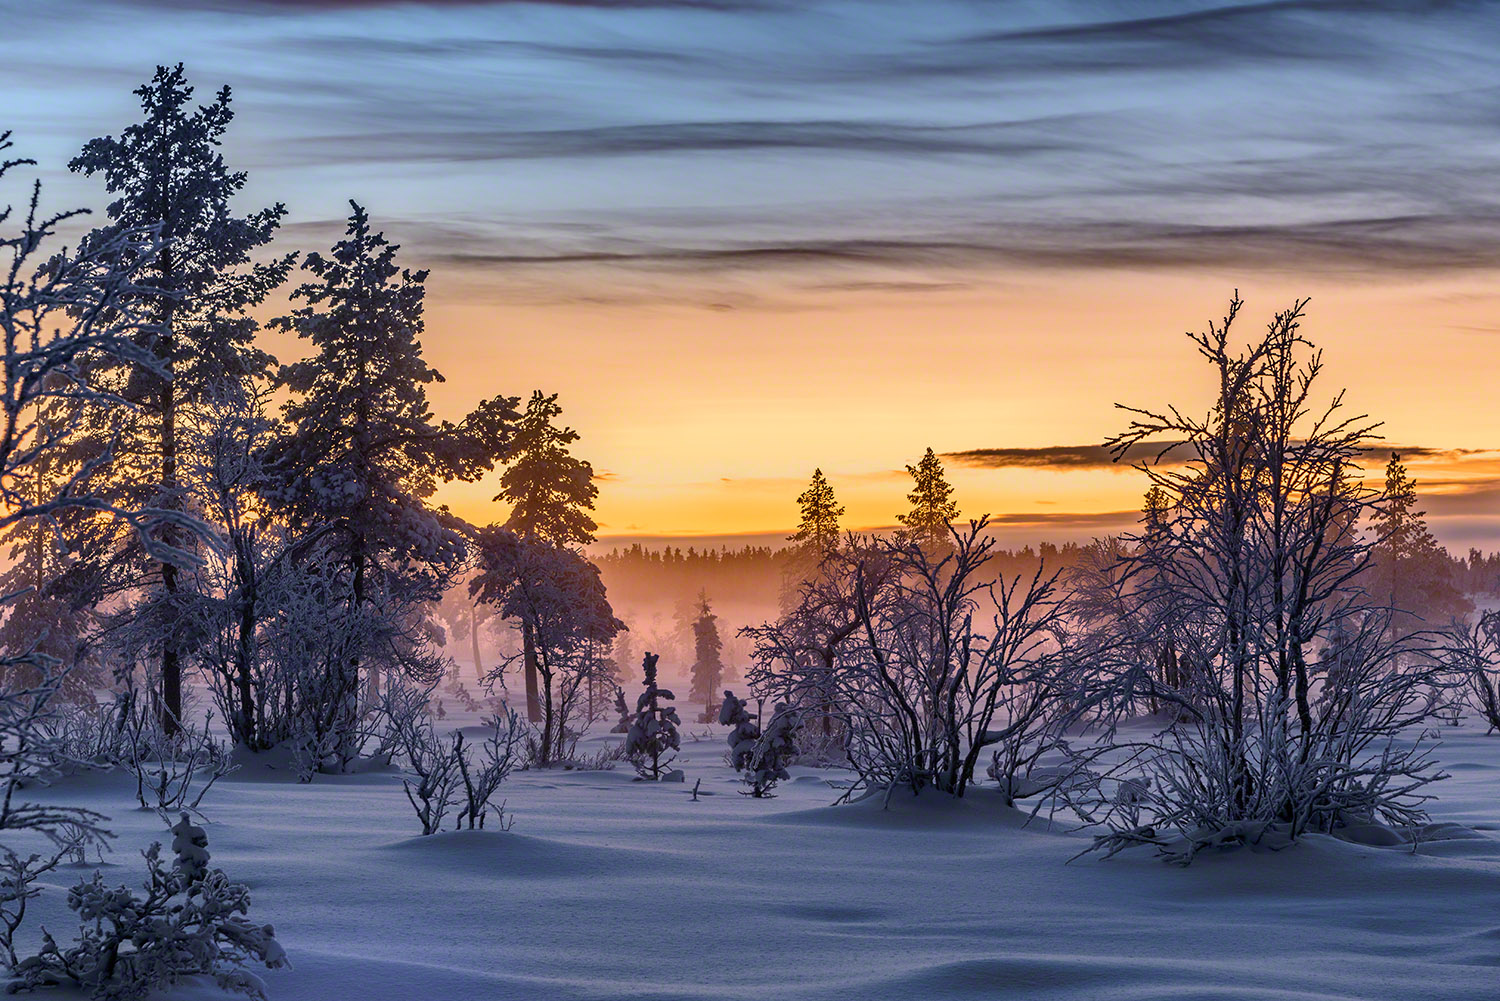 Winter photography during the polar night in Lapland, Finland.